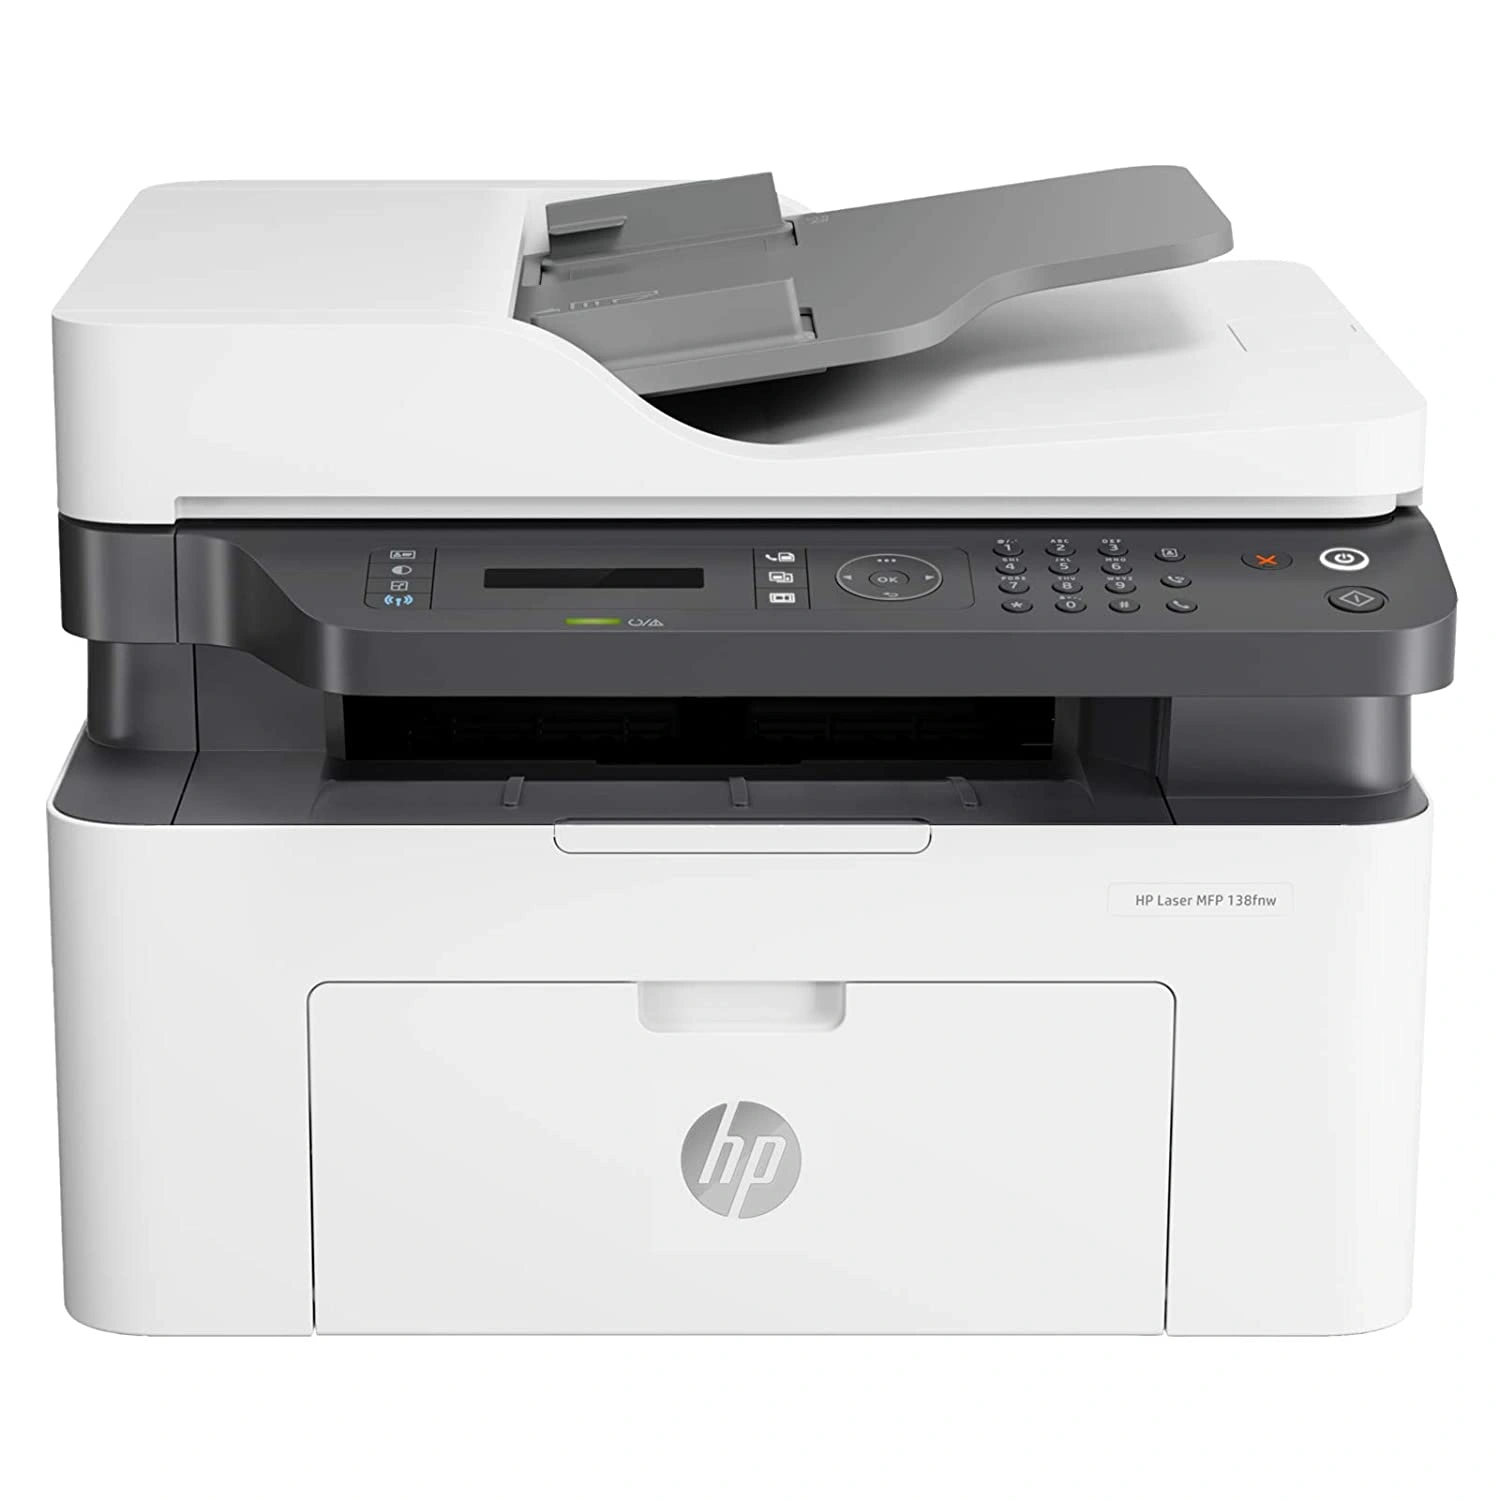 HP Laser MFP 138fnwMultifunction Printer (Print/Scan/Copy/Fax/Wireless)-4ZB91A